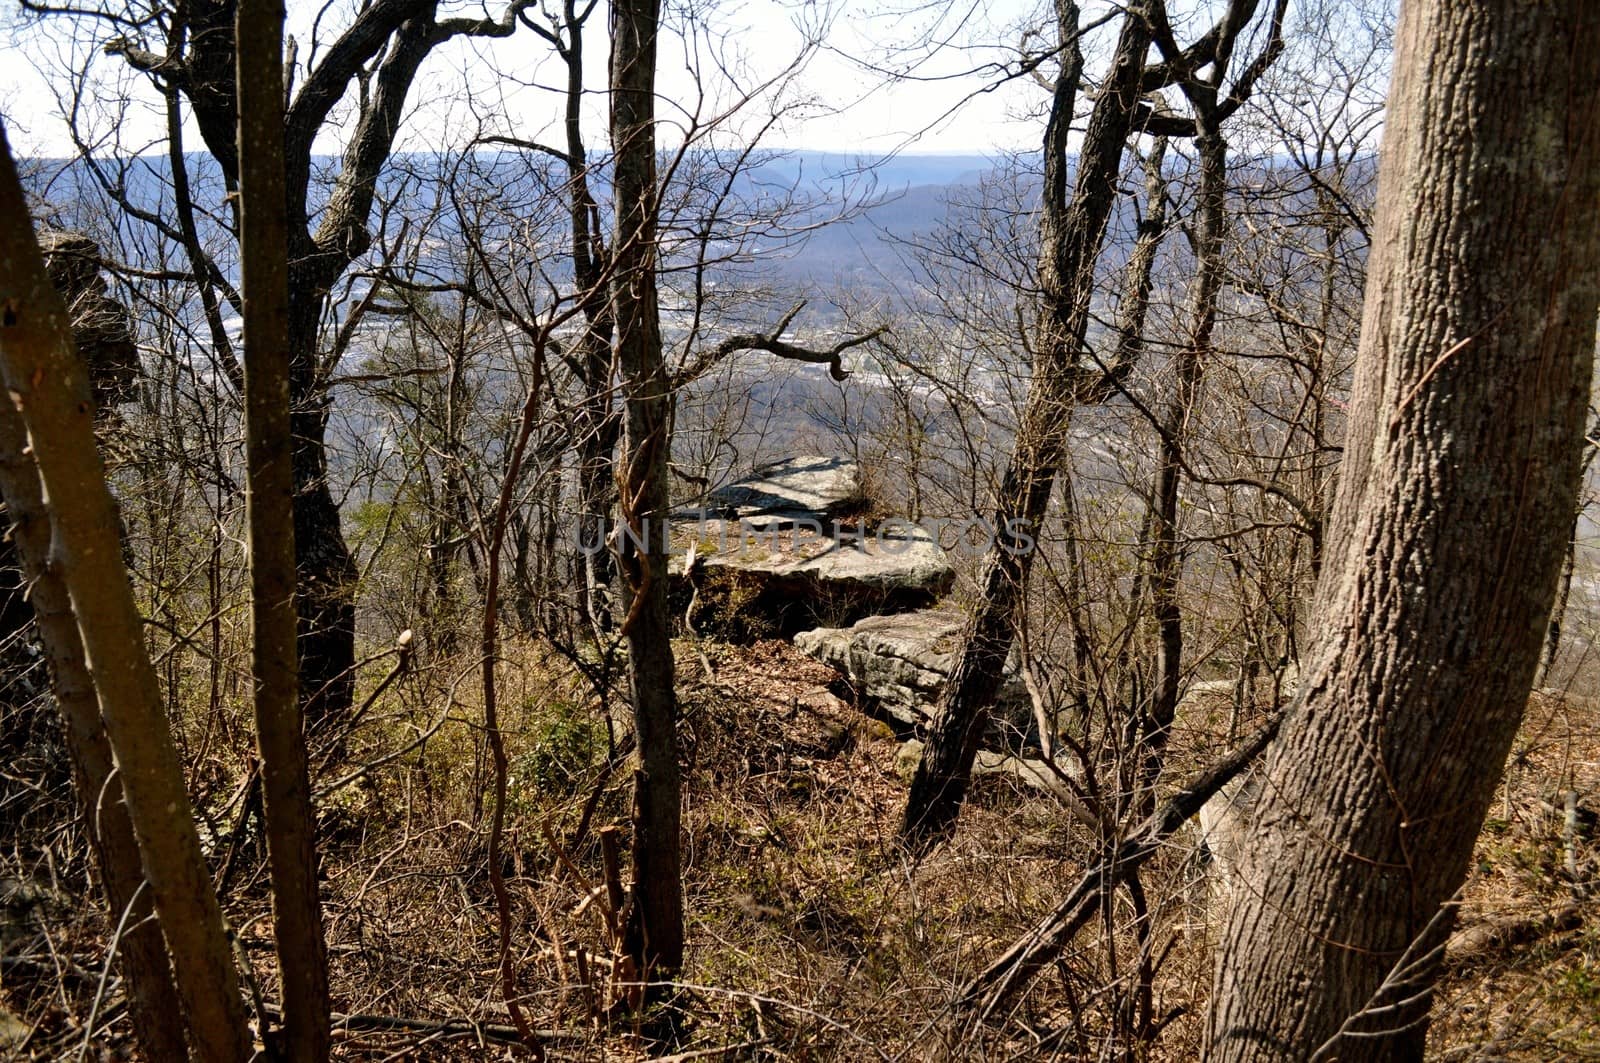 Tree and Boulder overlook Chattanooga